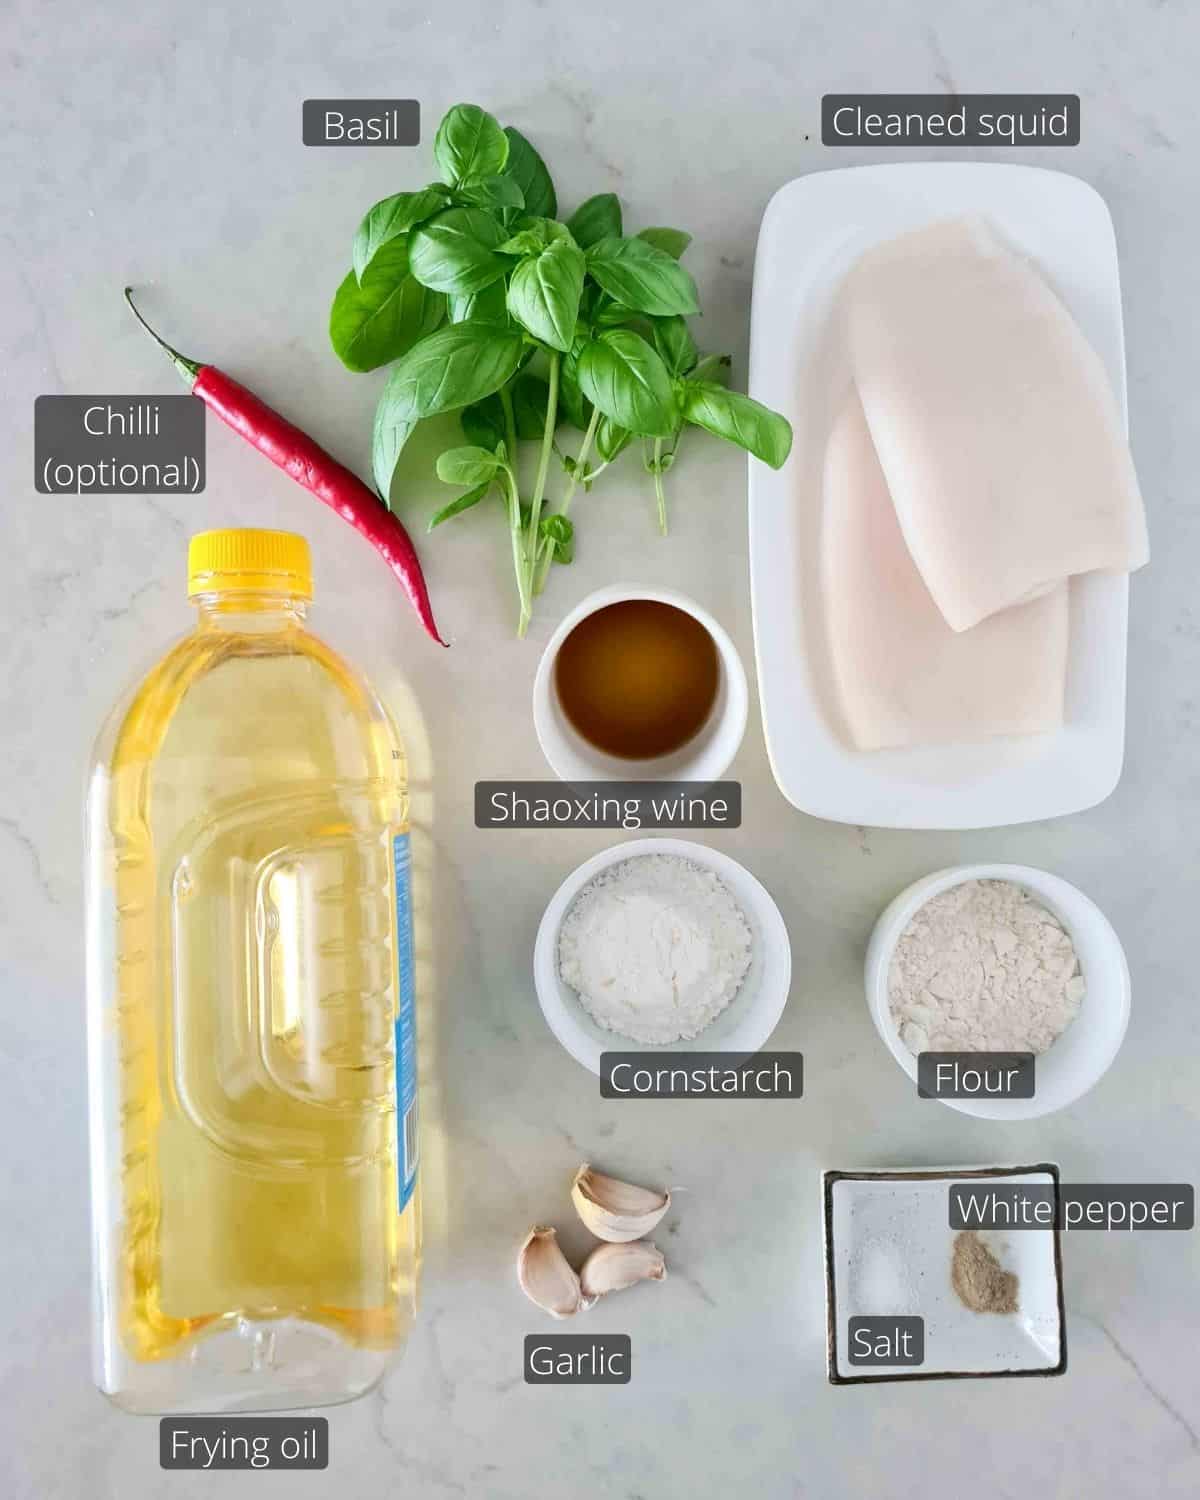 Ingredients required for this recipe, labeled.